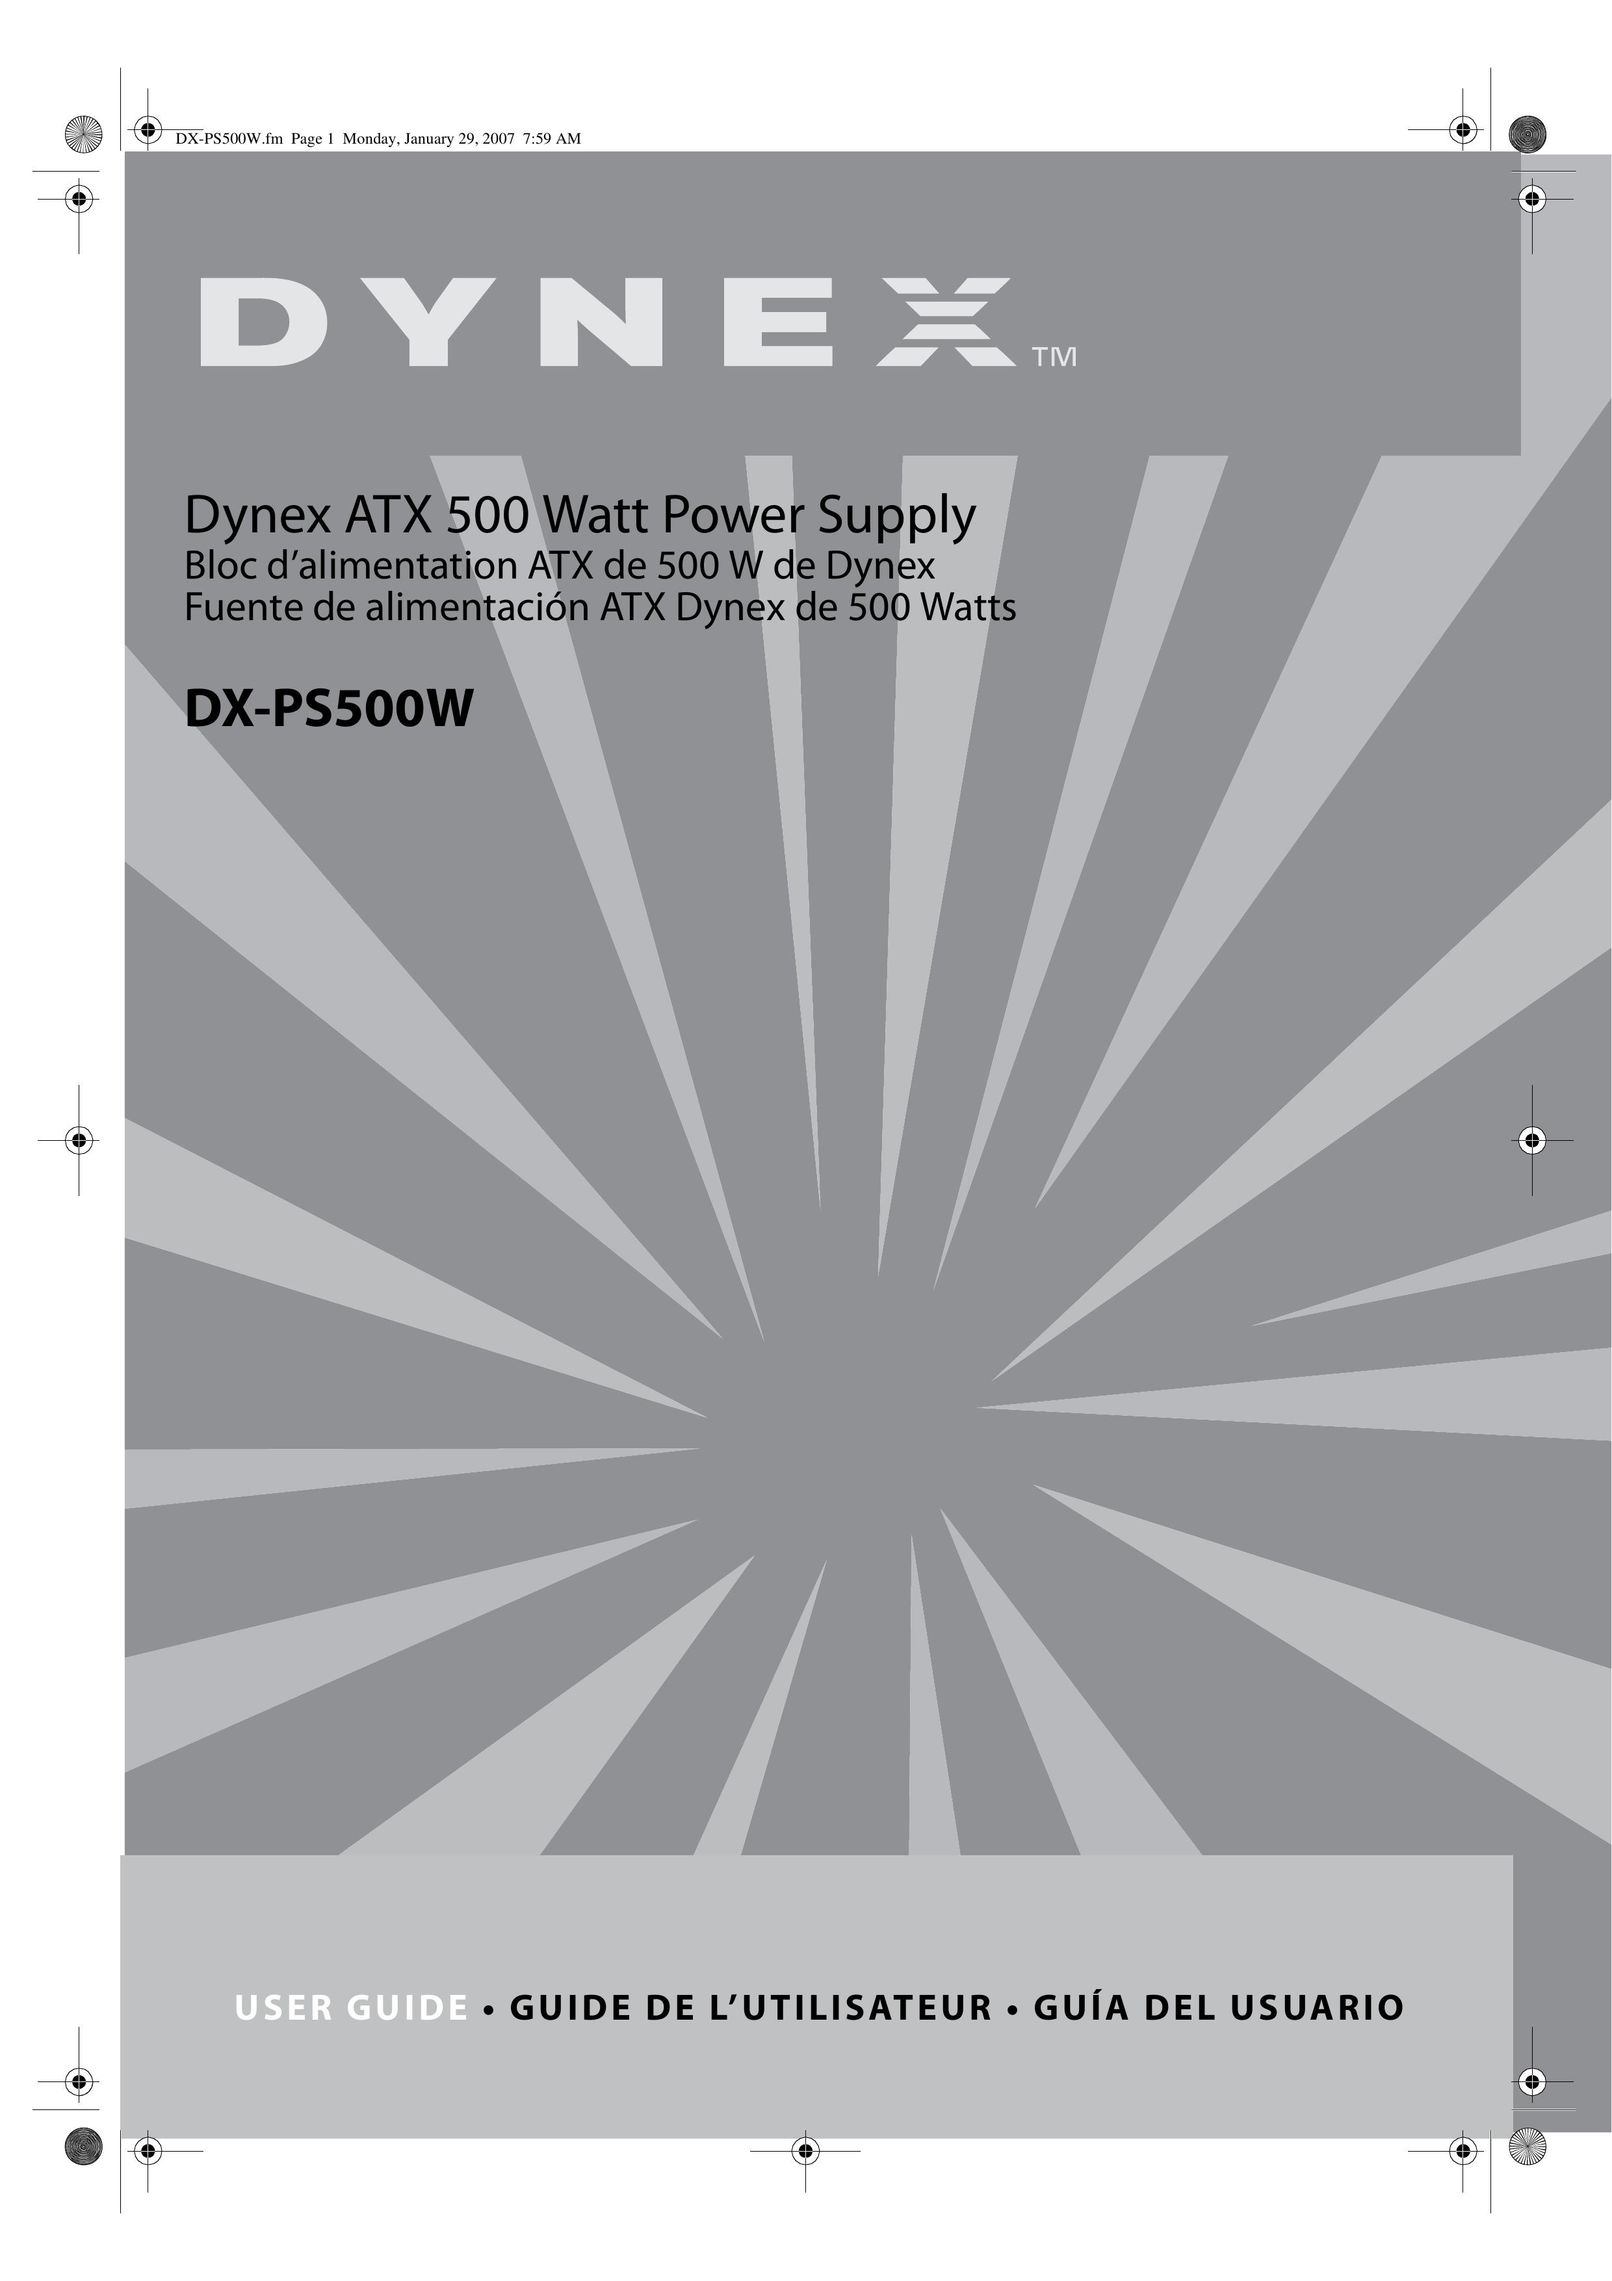 Dynex DX-PS500W Power Supply User Manual (Page 1)